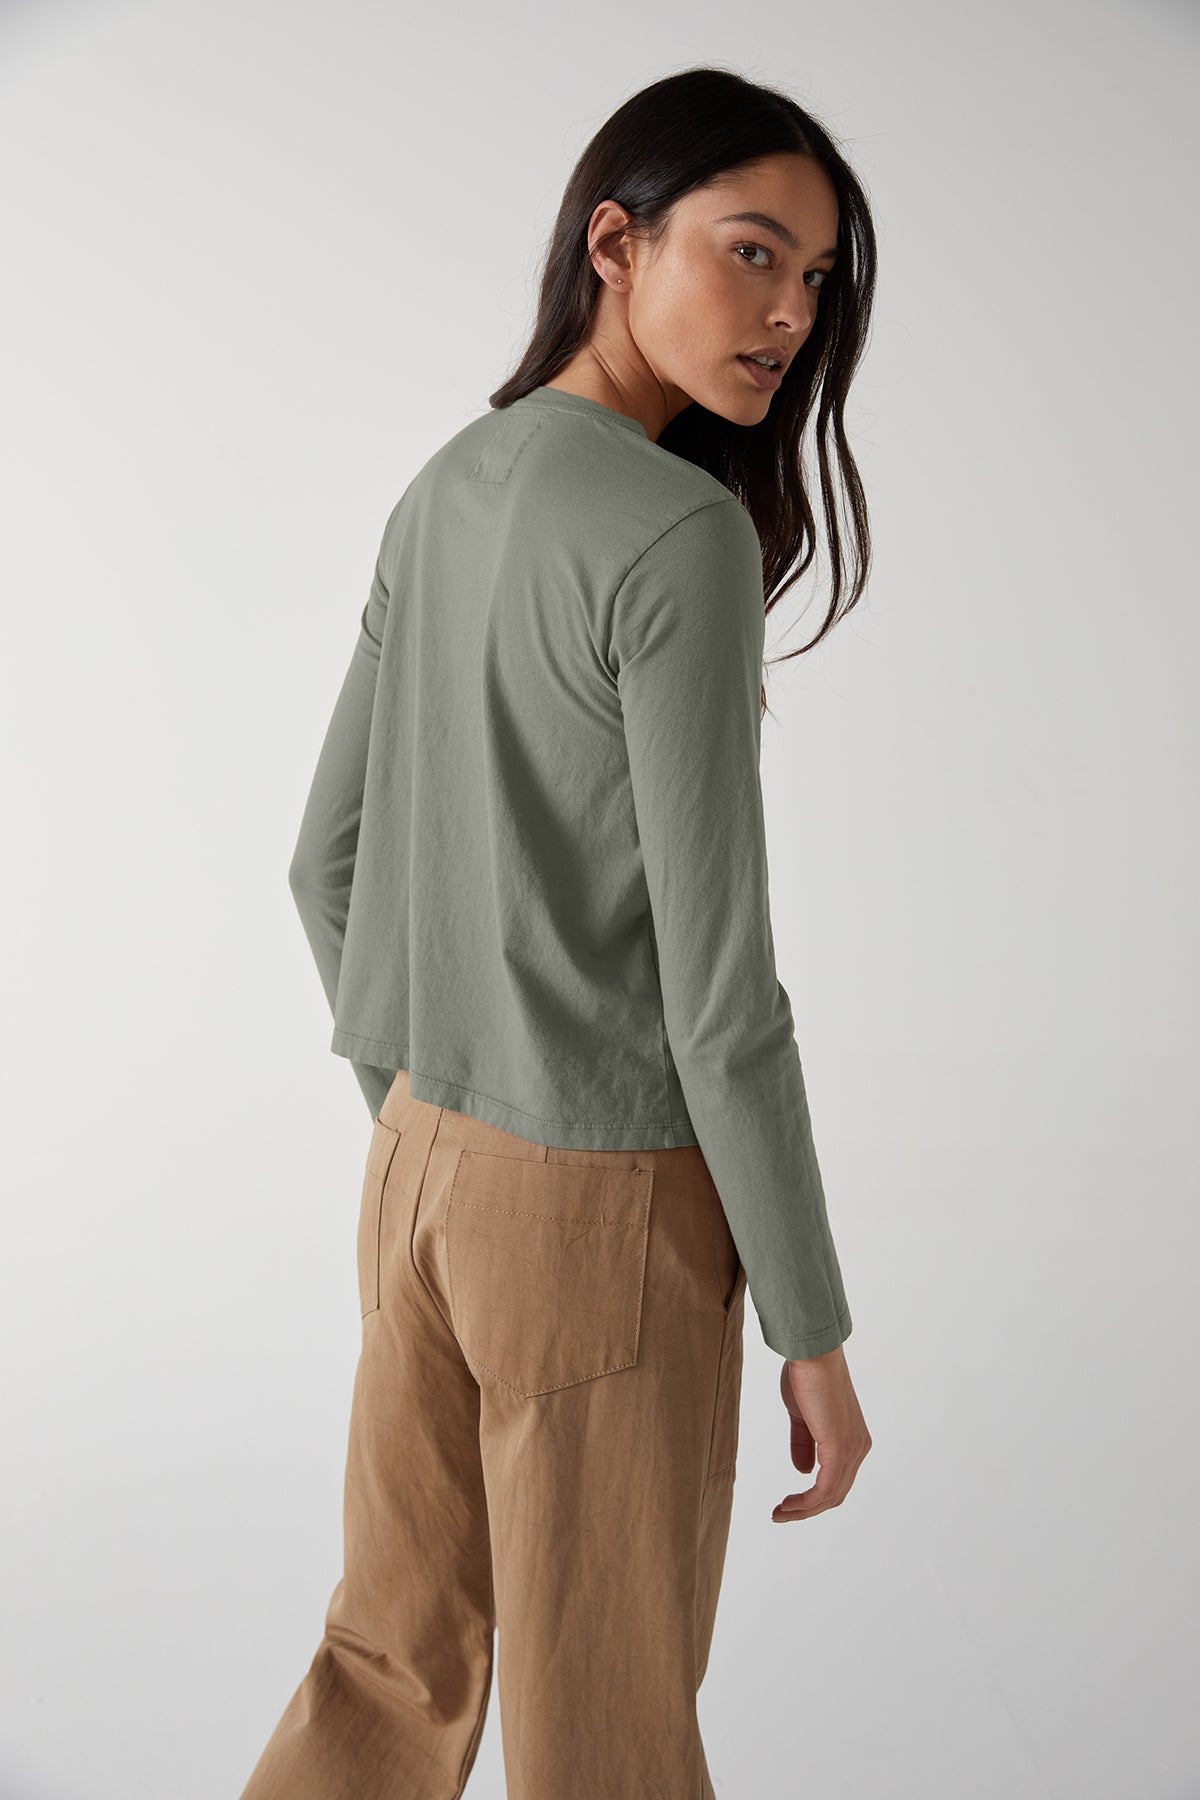 The back view of a woman wearing VICENTE TEE khaki pants and a long sleeved top by Velvet by Jenny Graham.-24427643601089